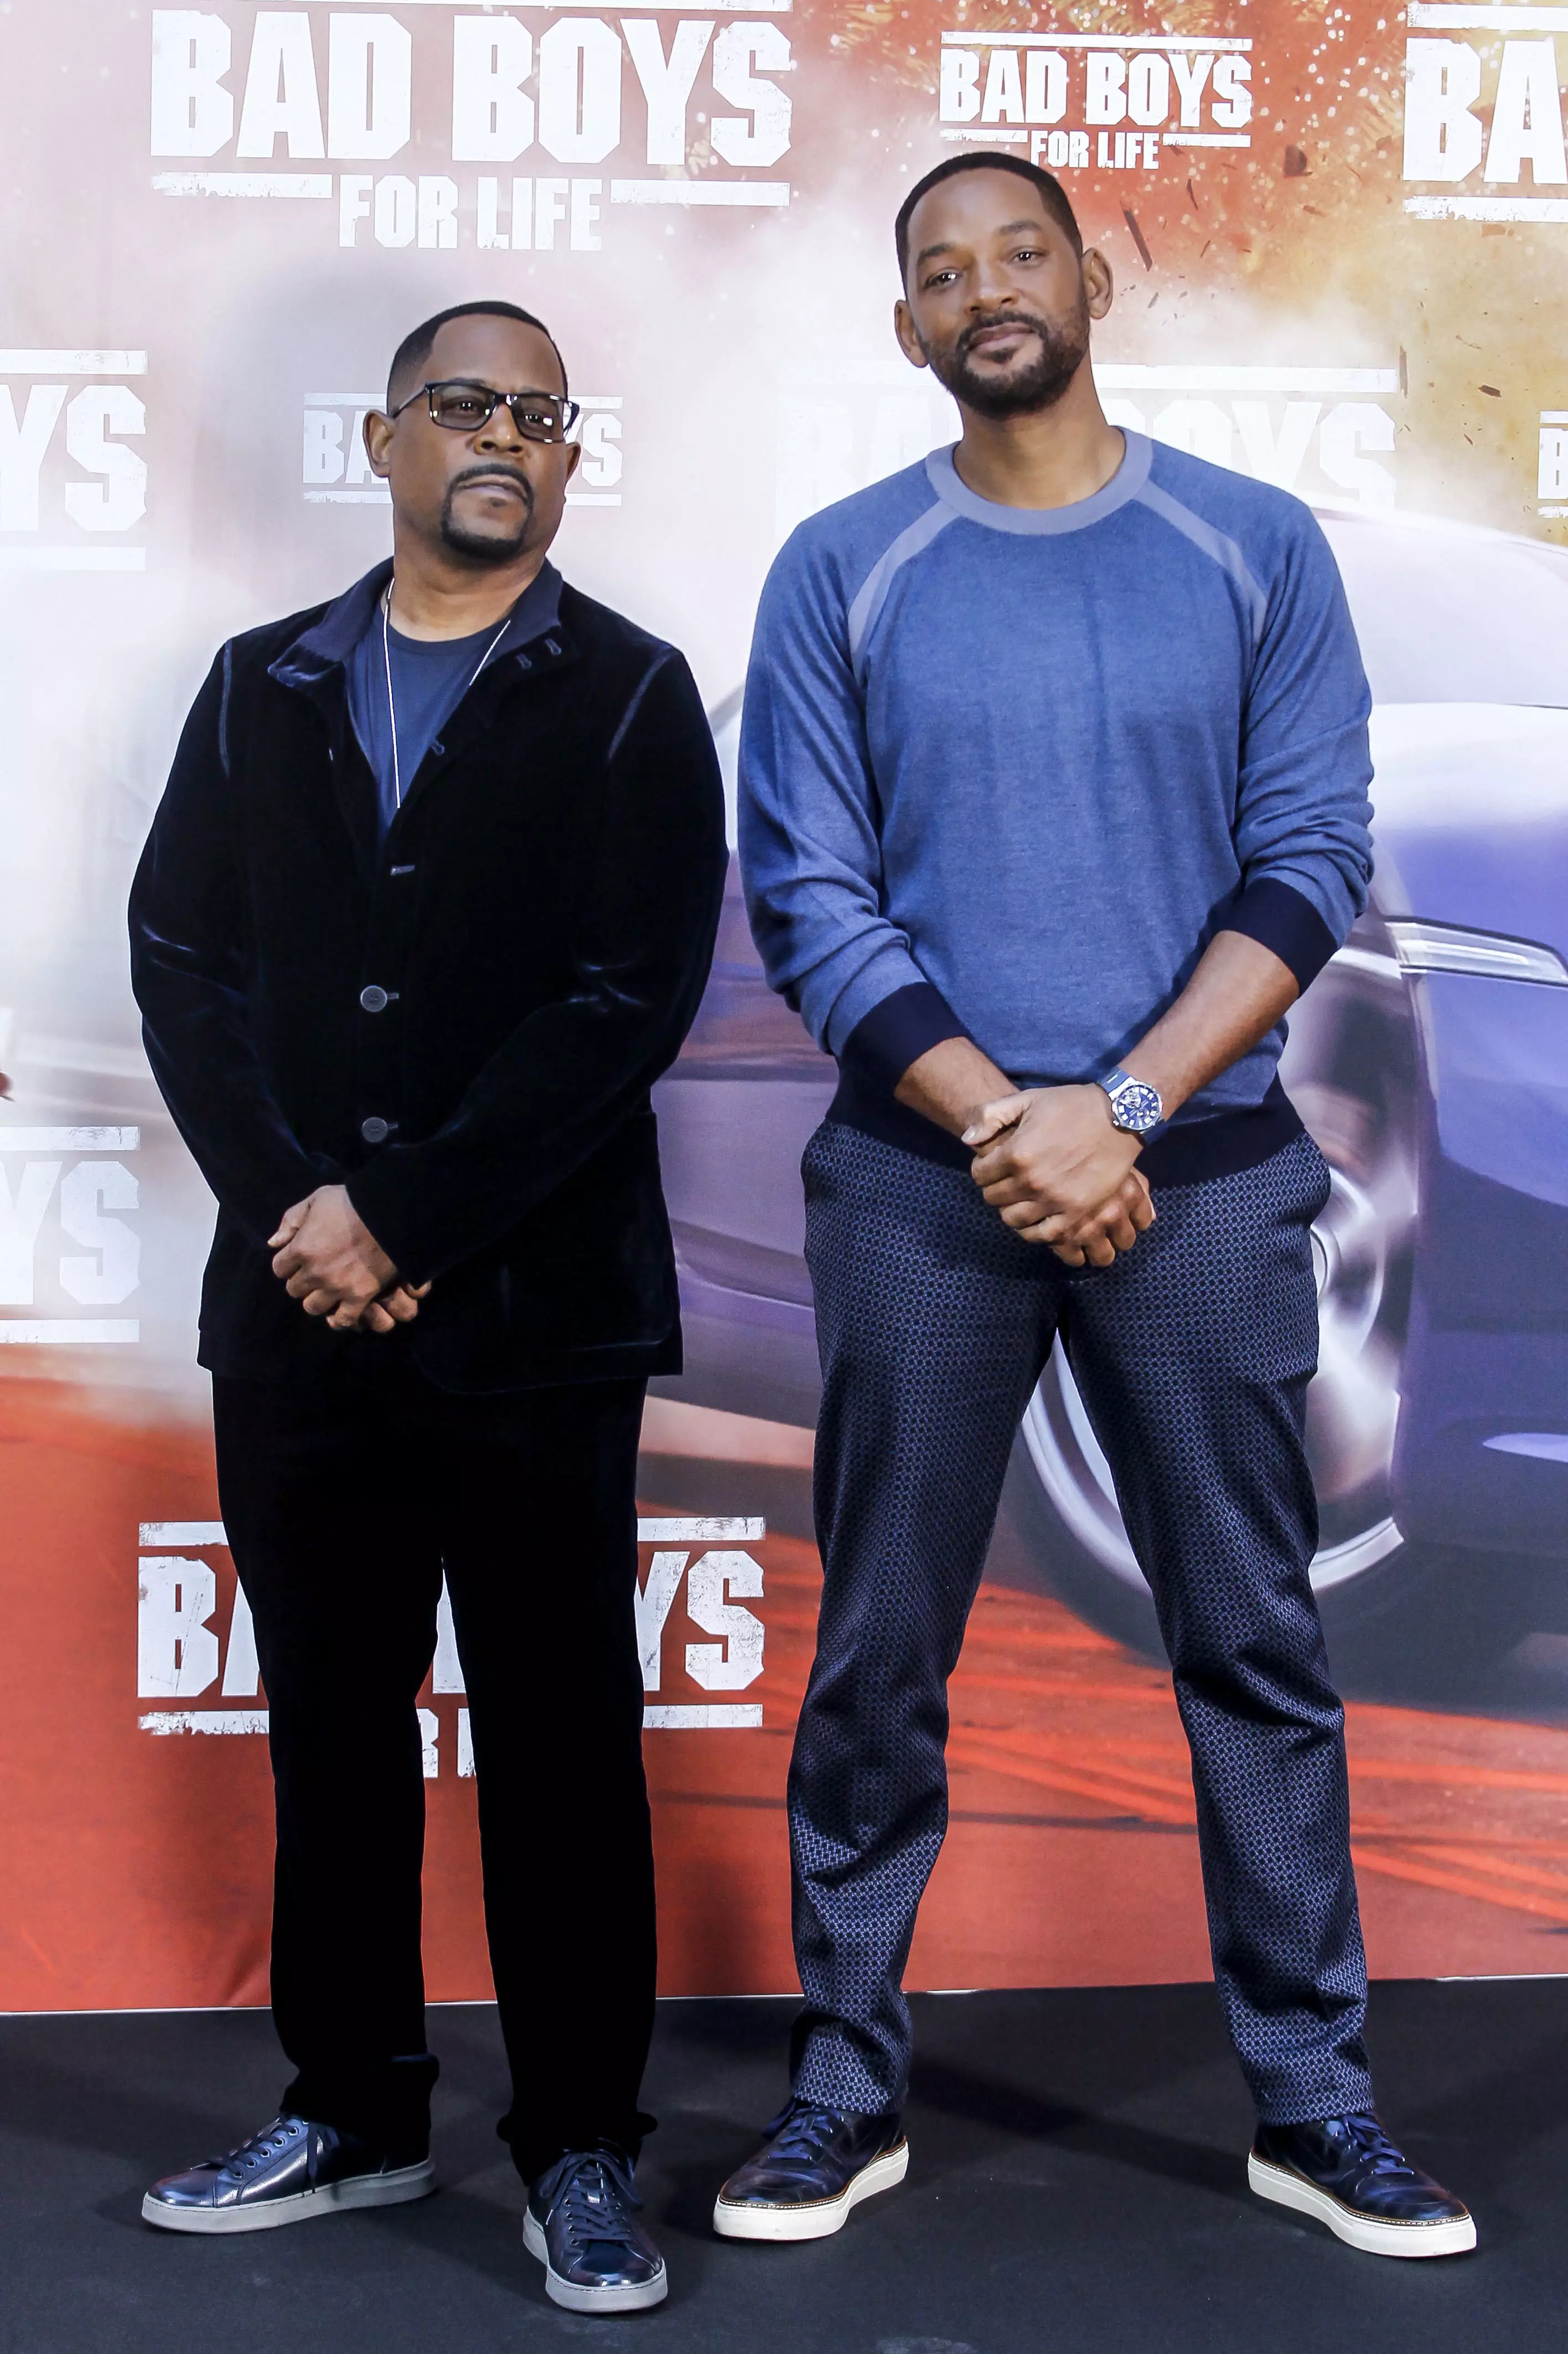 Will Smith and Martin Lawrence at Bad Boys for Life photocall.